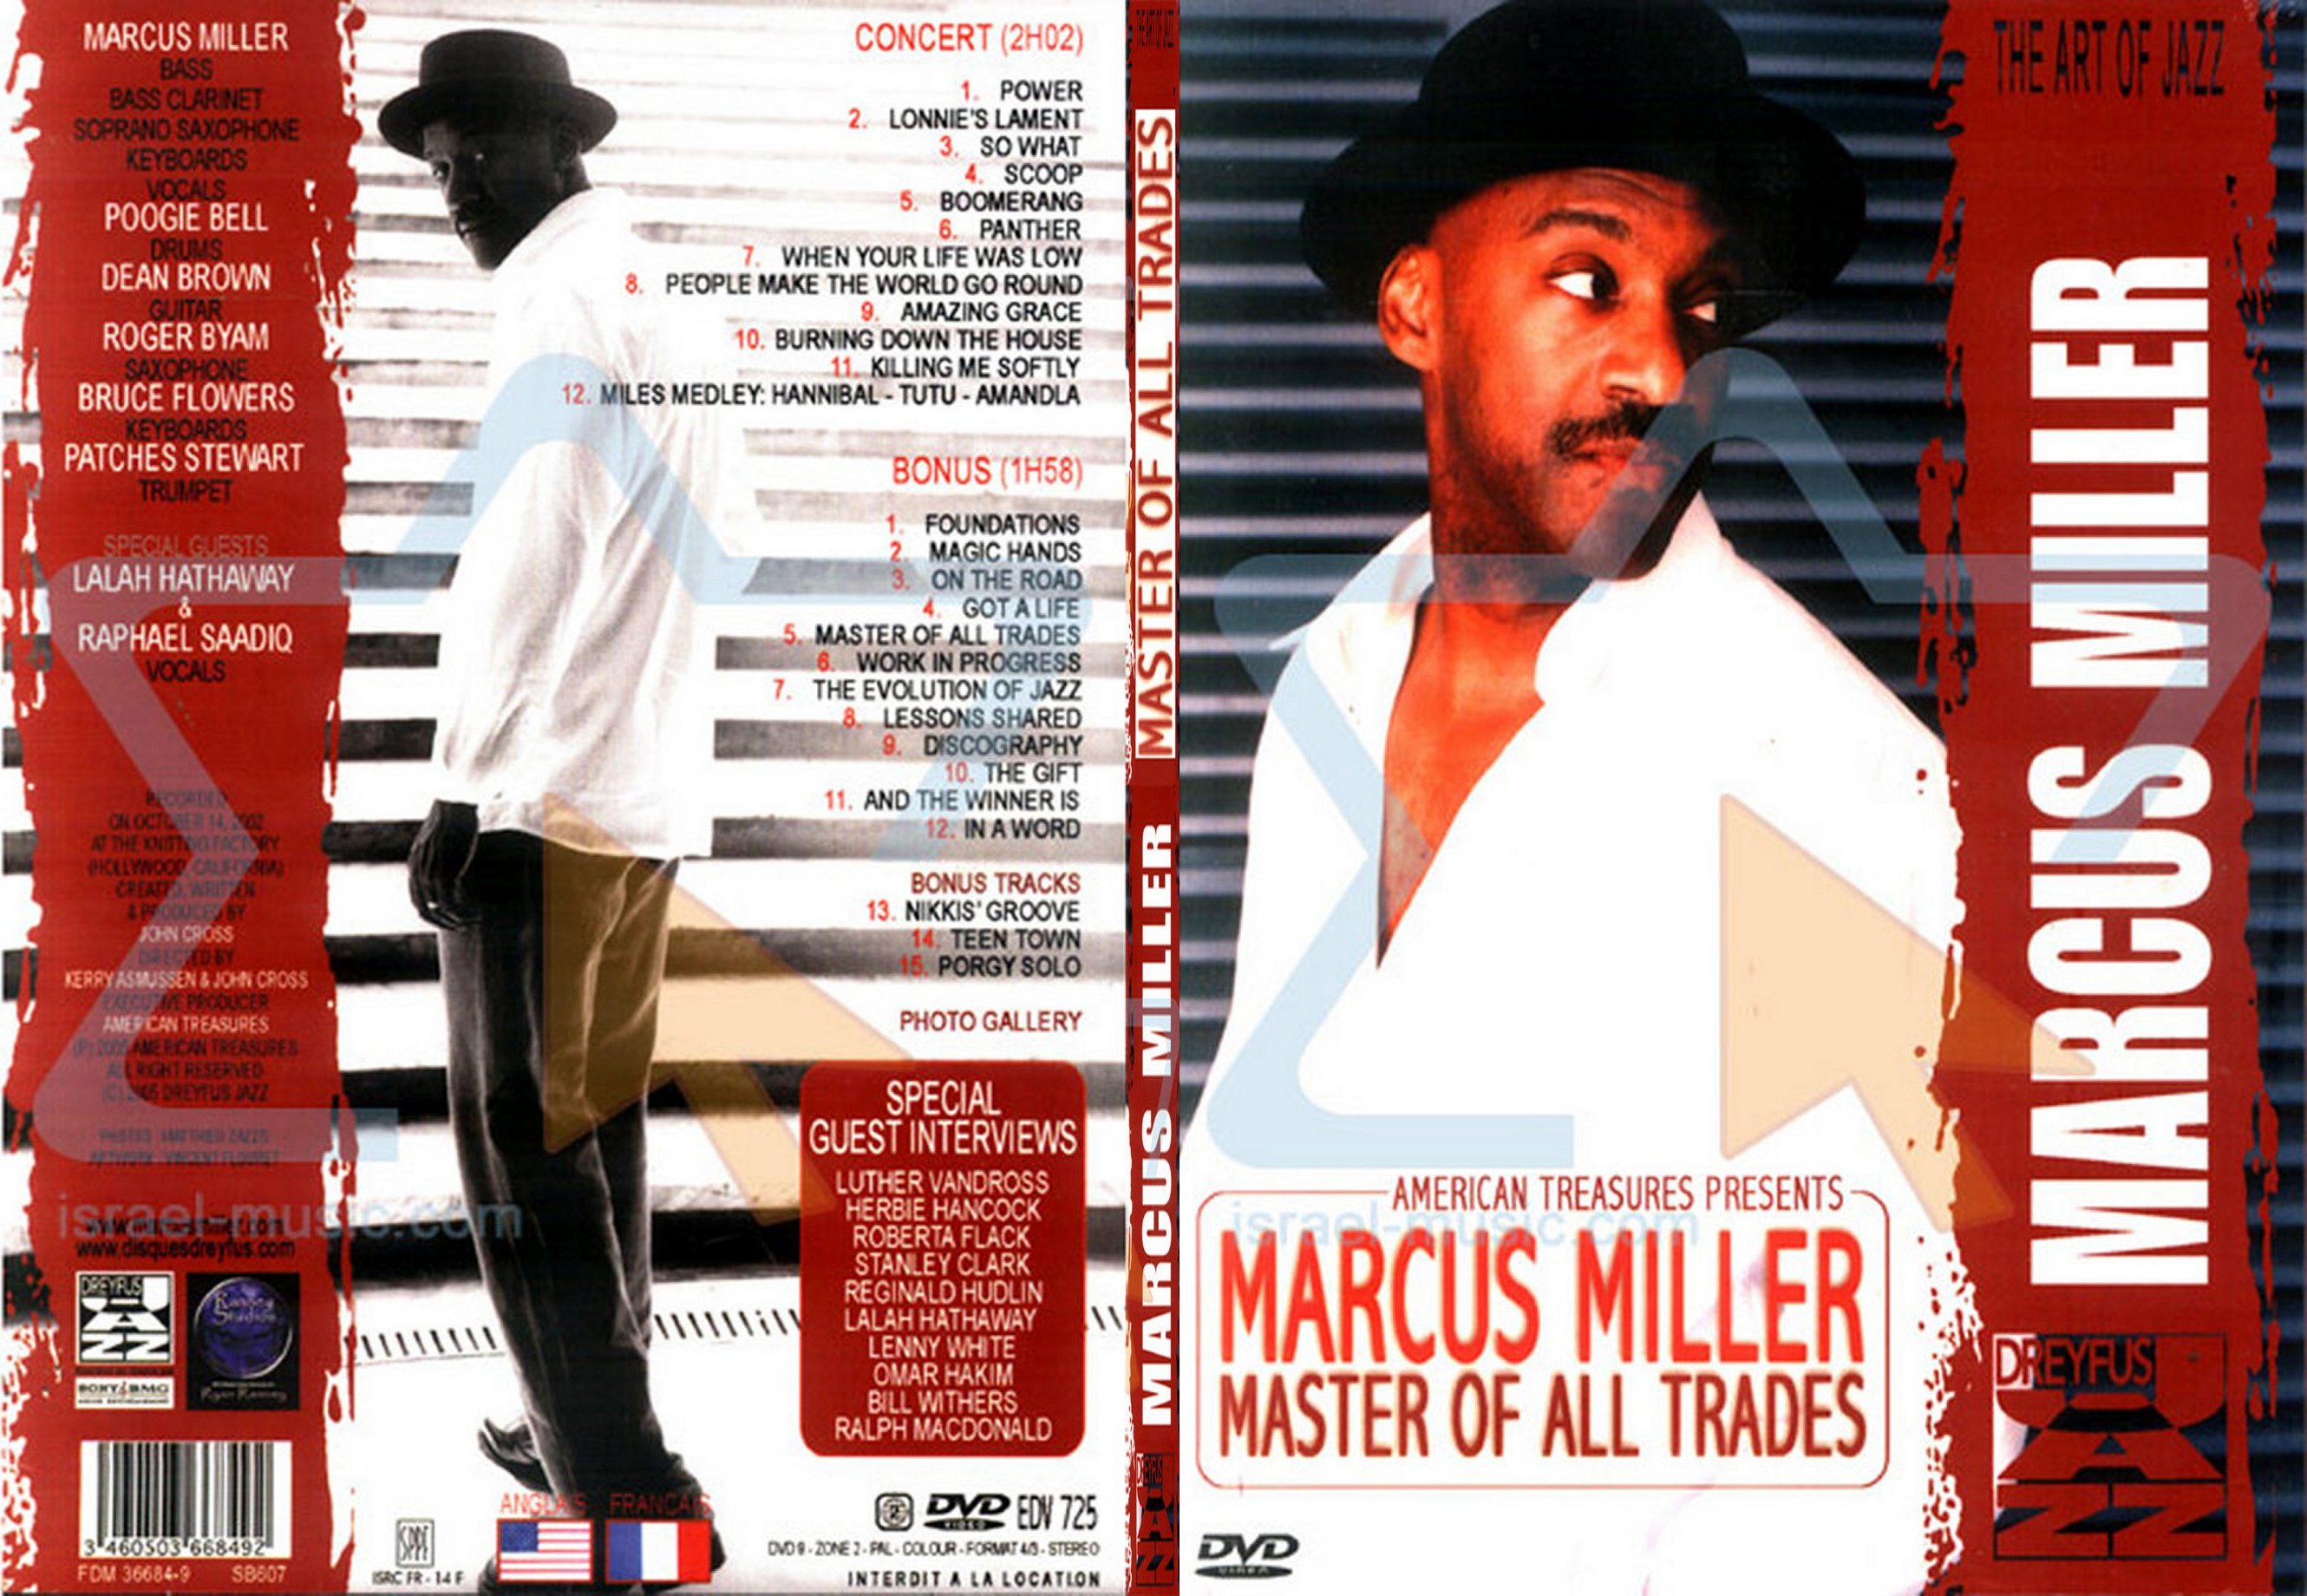 Jaquette DVD Marcus Miller Master of all trades - SLIM